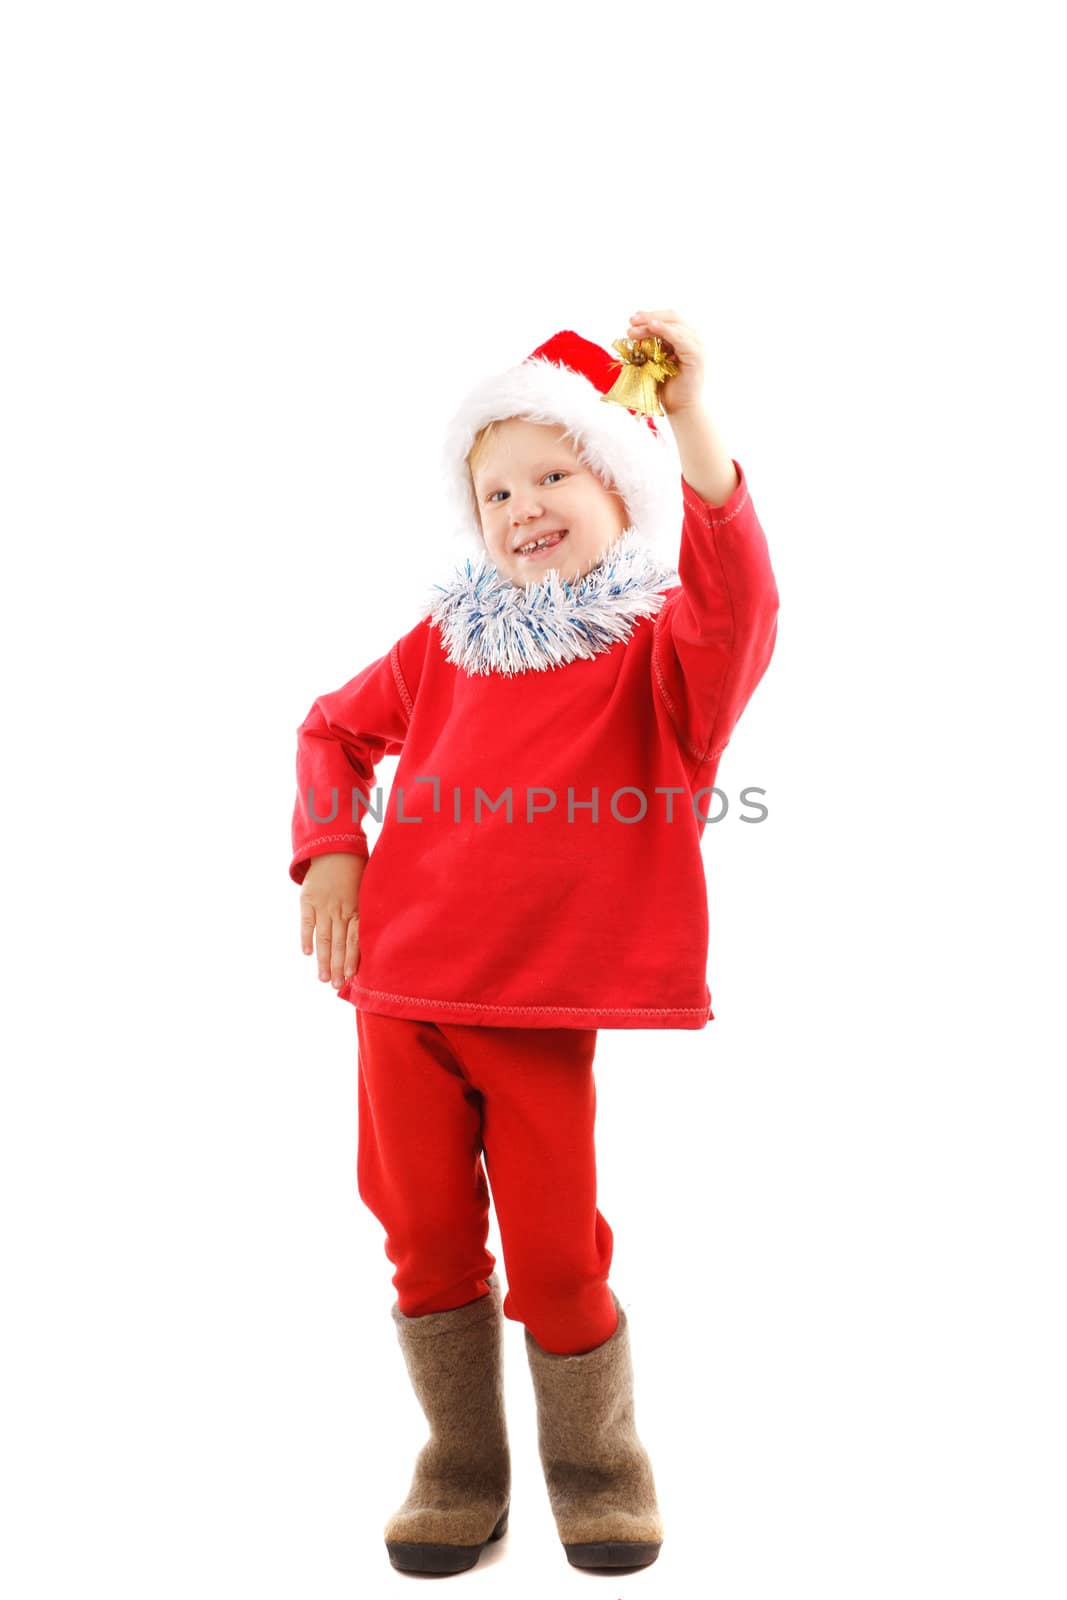 Child dressed in red ringing a bell